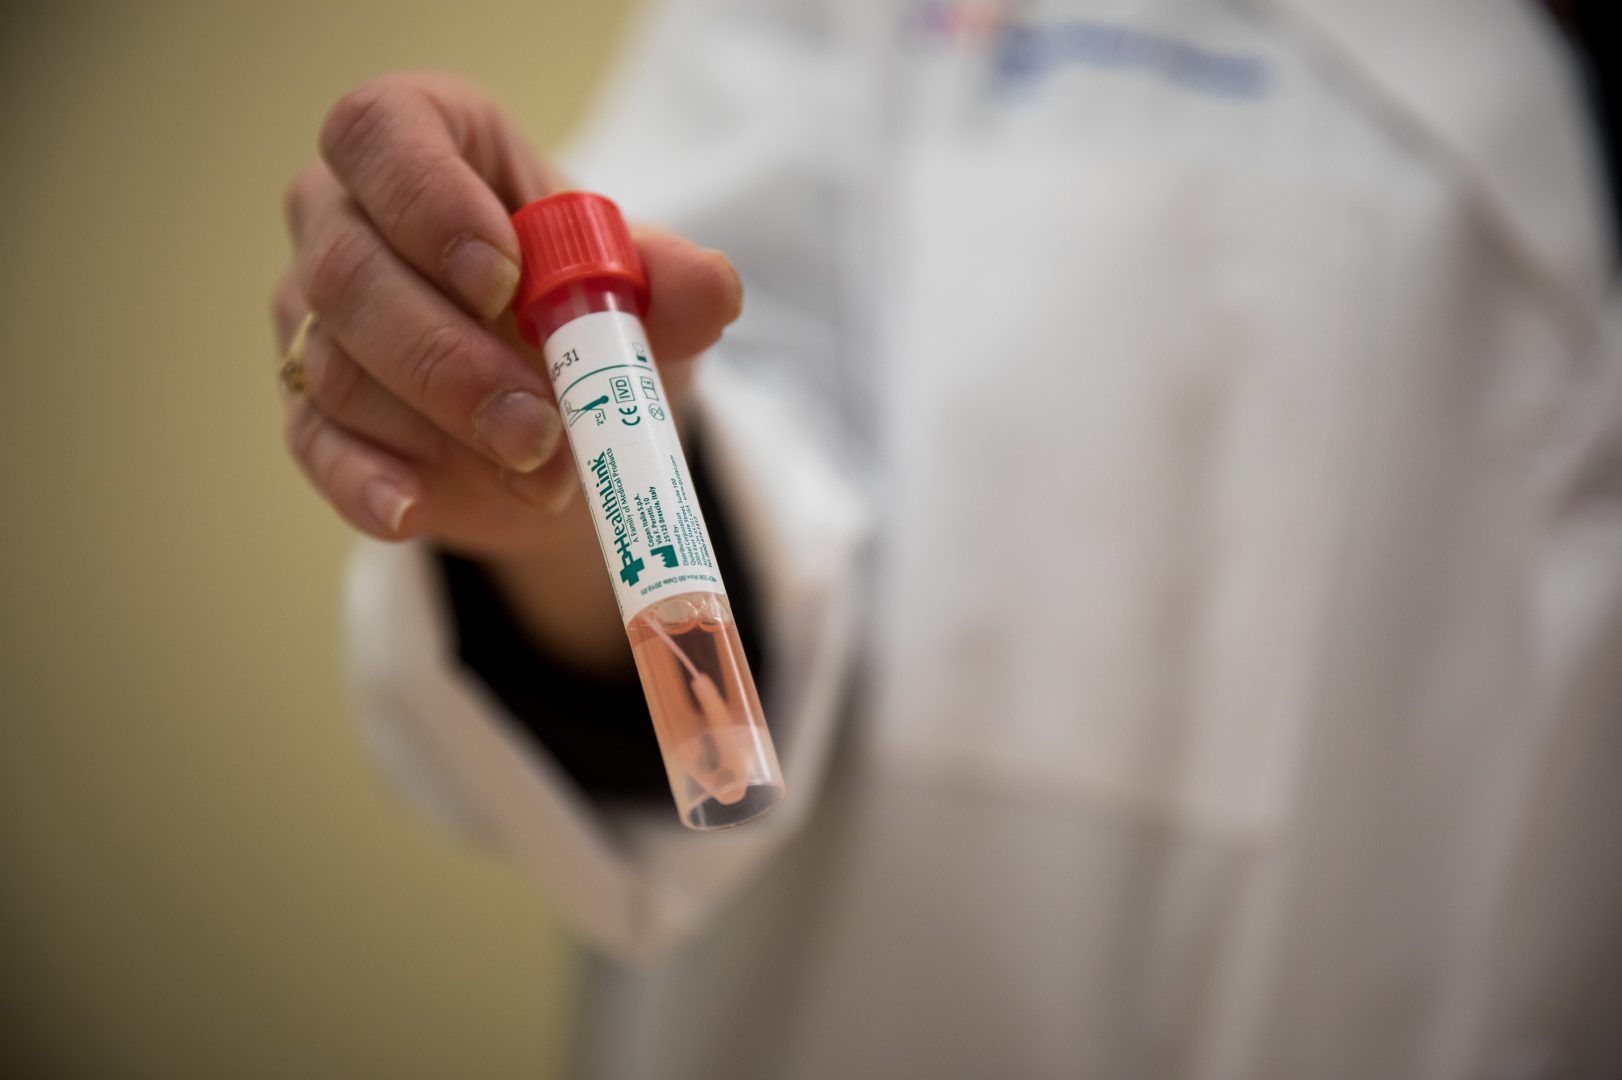 A pathologist holds a vial from a COVID-19 test kit. Various bottlenecks in the U.S. that have constrained widespread testing for the coronavirus were problems in February and persist today.